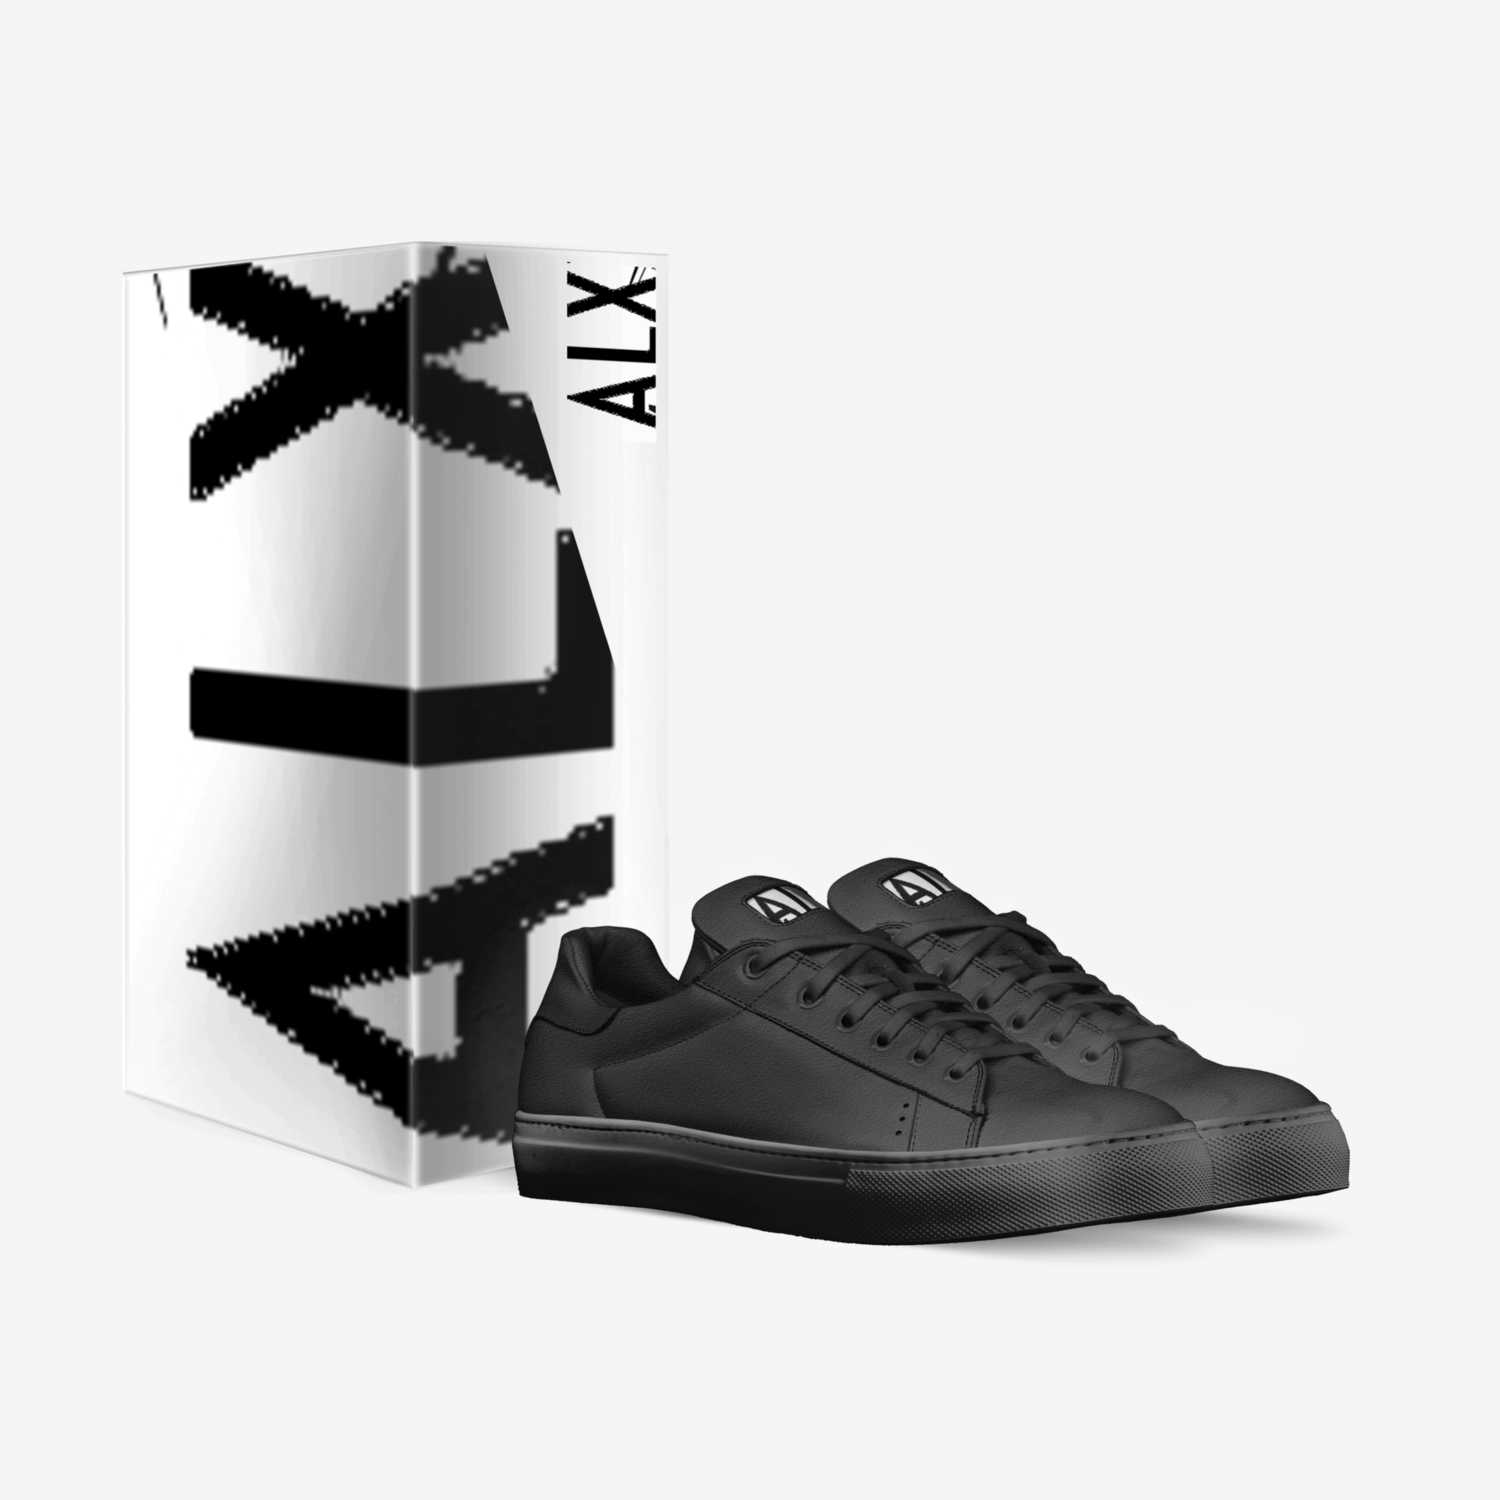 ALX'Blac custom made in Italy shoes by Alexander Bowie | Box view